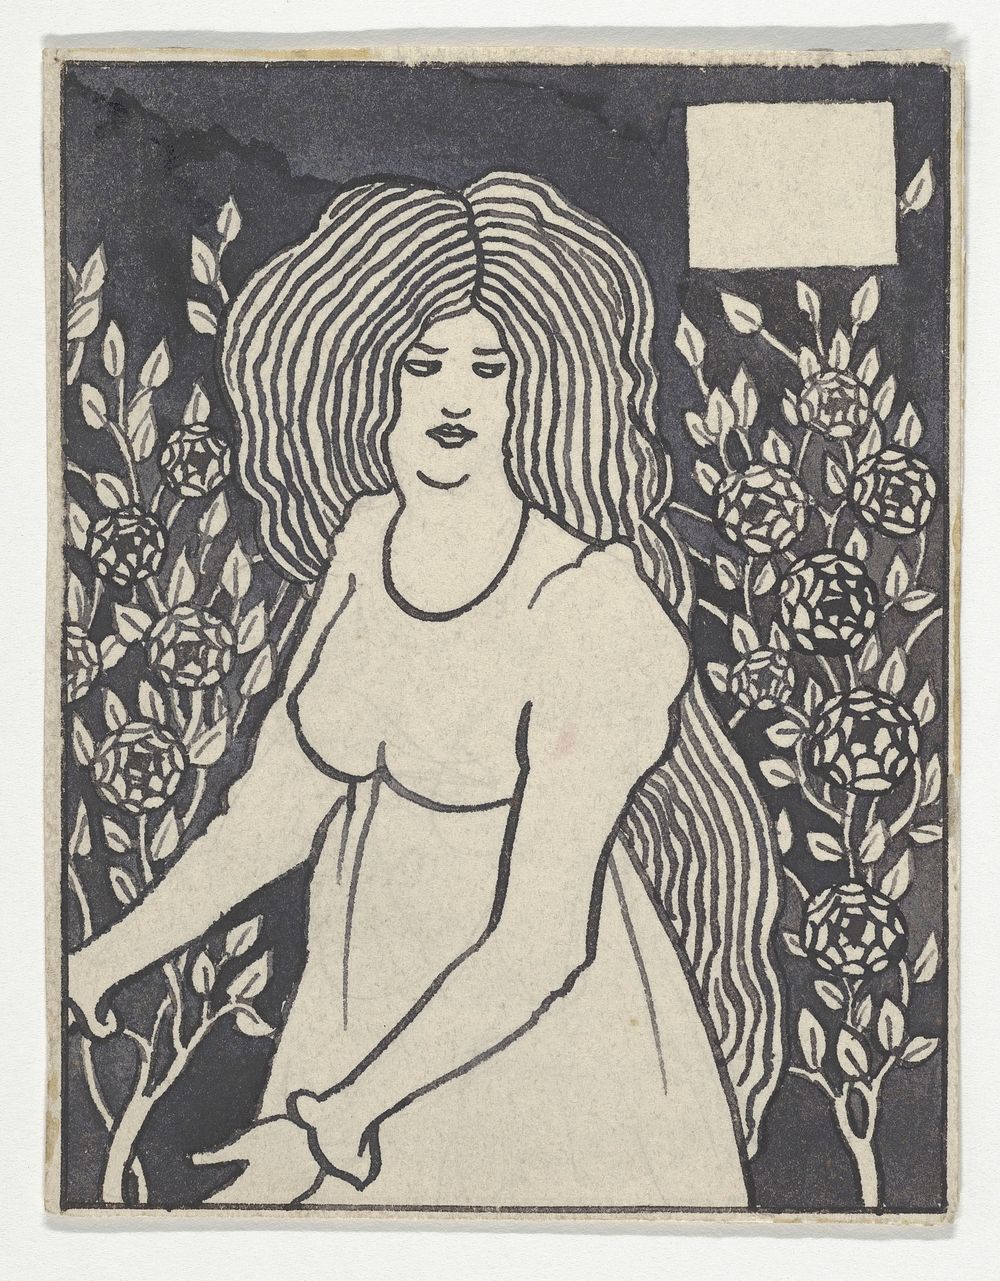 Long-haired Woman in Front of Tall Rosebushes (Chapter Heading, "Le Morte d'Arthur," J. M. Dent, 1893–4, Part IX, book xiii…